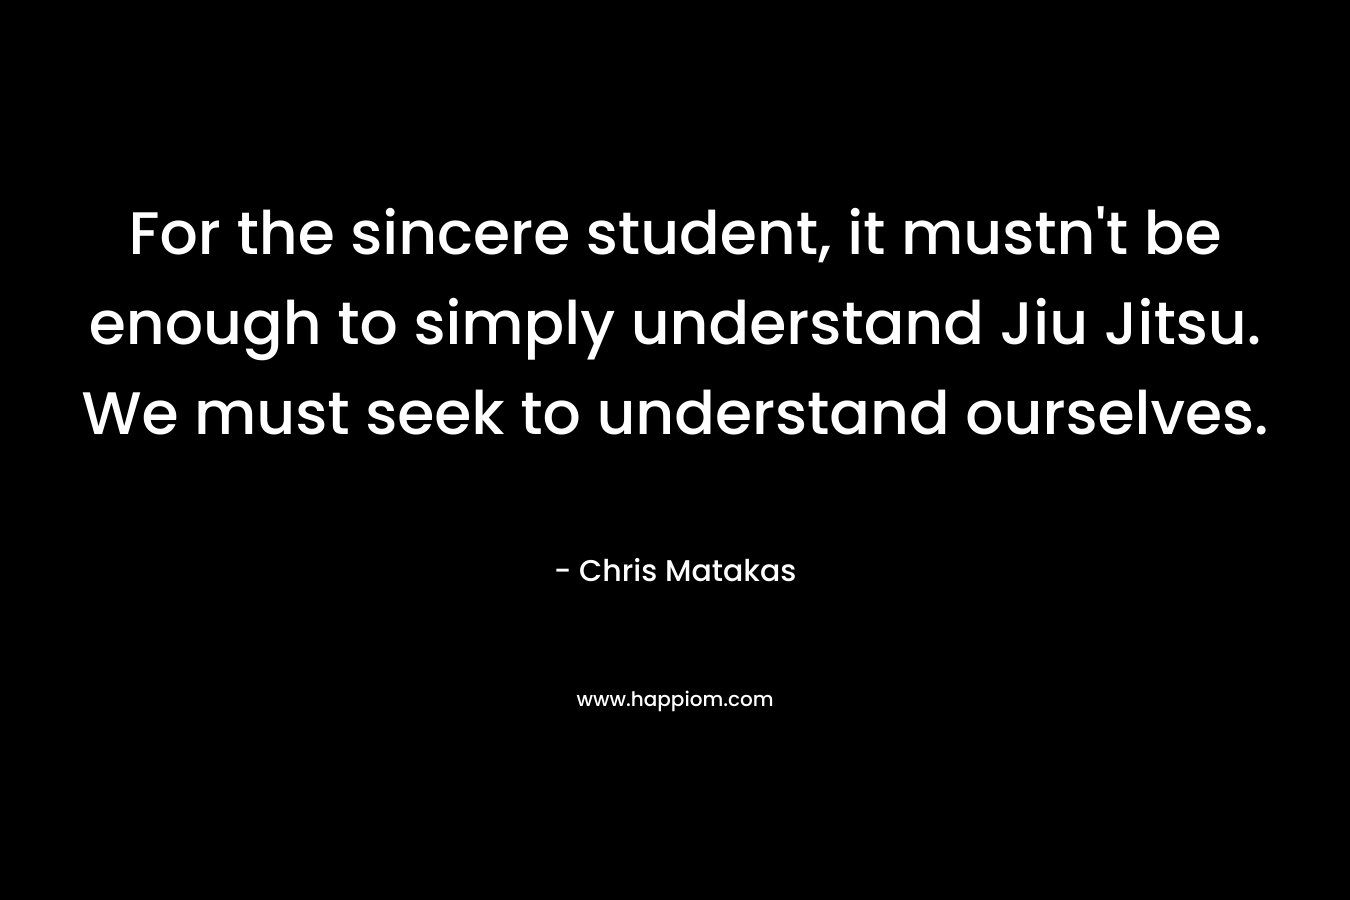 For the sincere student, it mustn’t be enough to simply understand Jiu Jitsu. We must seek to understand ourselves. – Chris Matakas